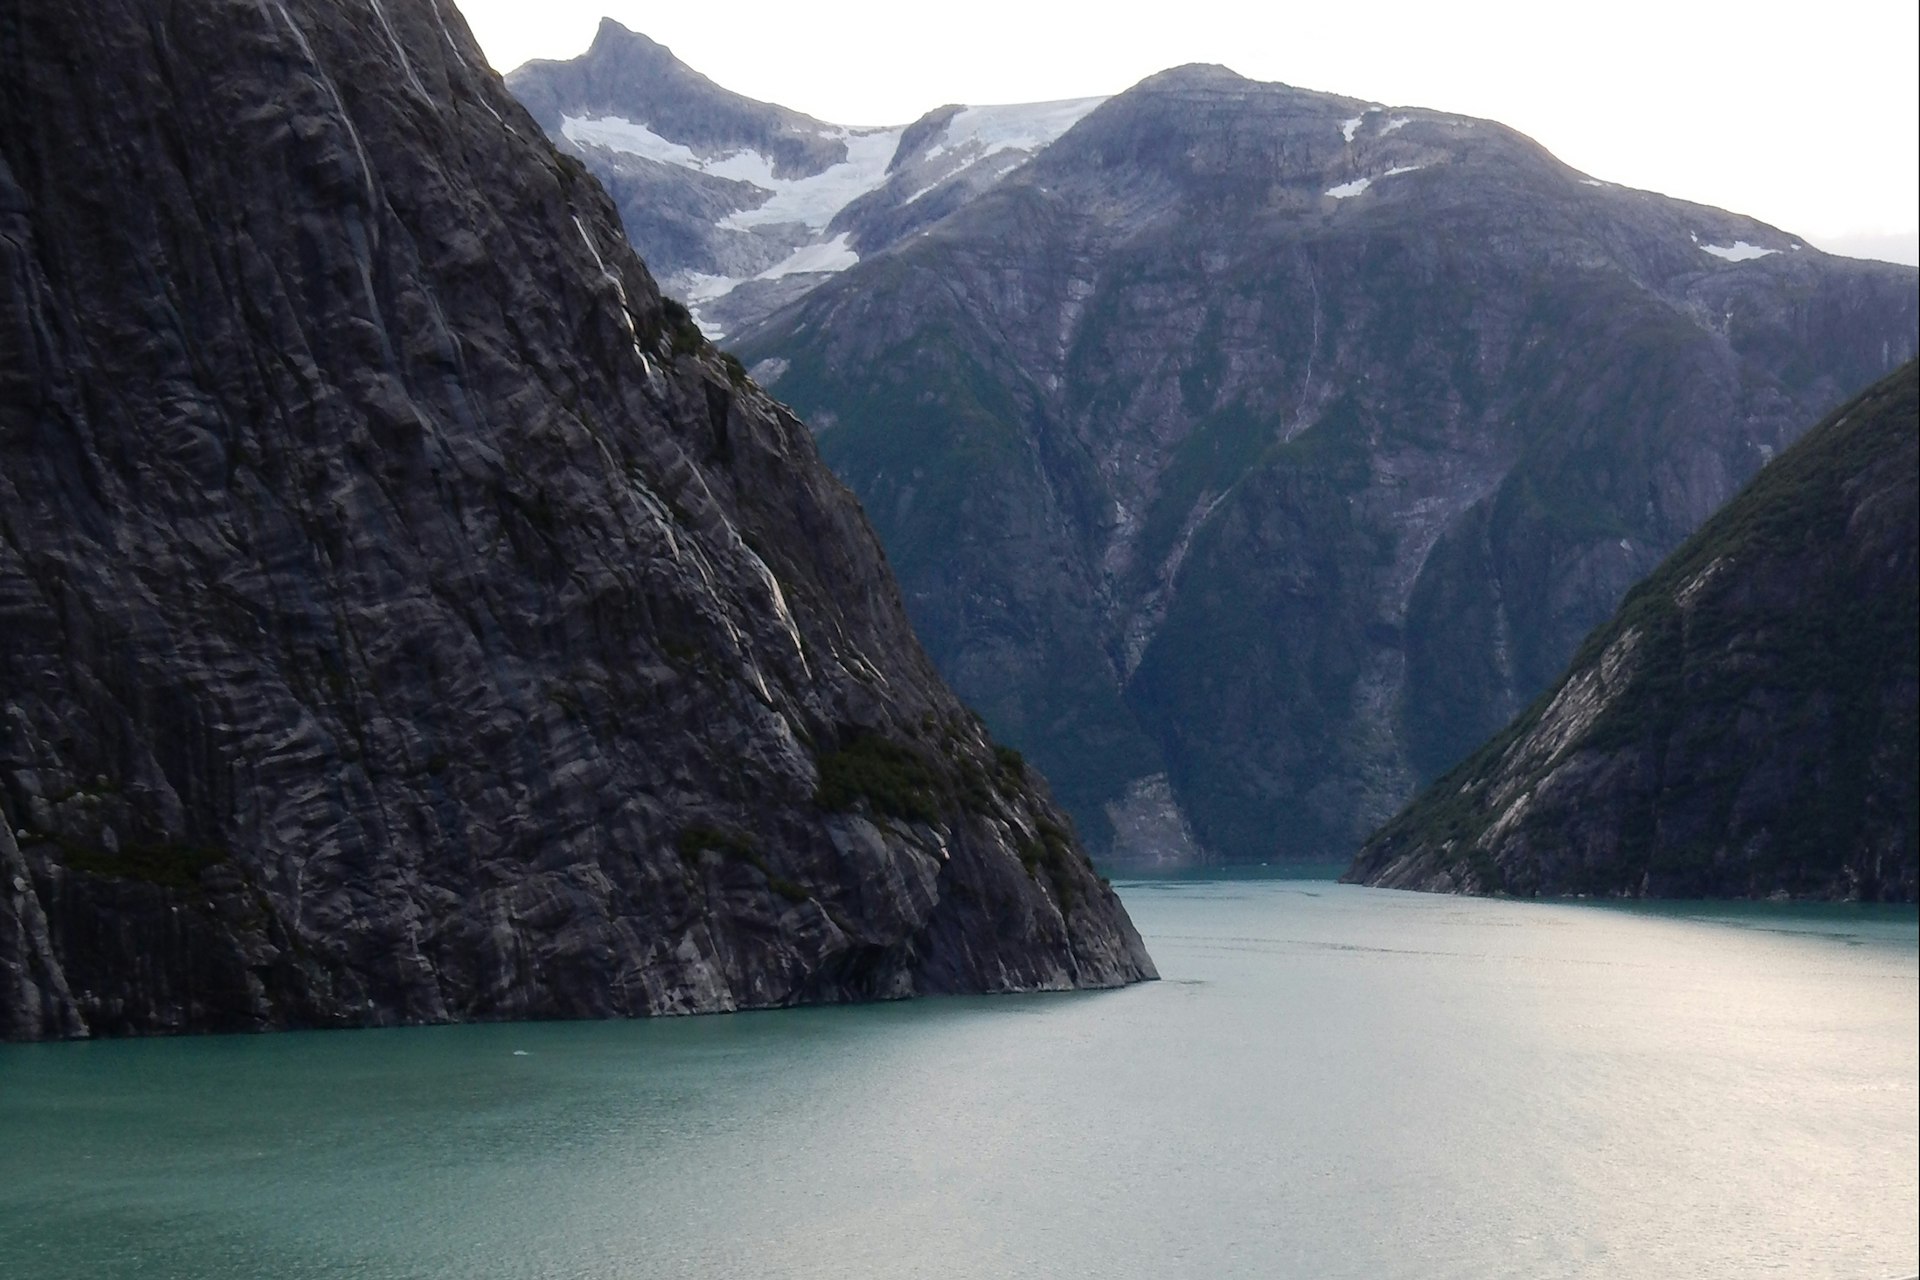 View of the Tracy Arm Fjord. Image by Suki Gear / Lonely Planet